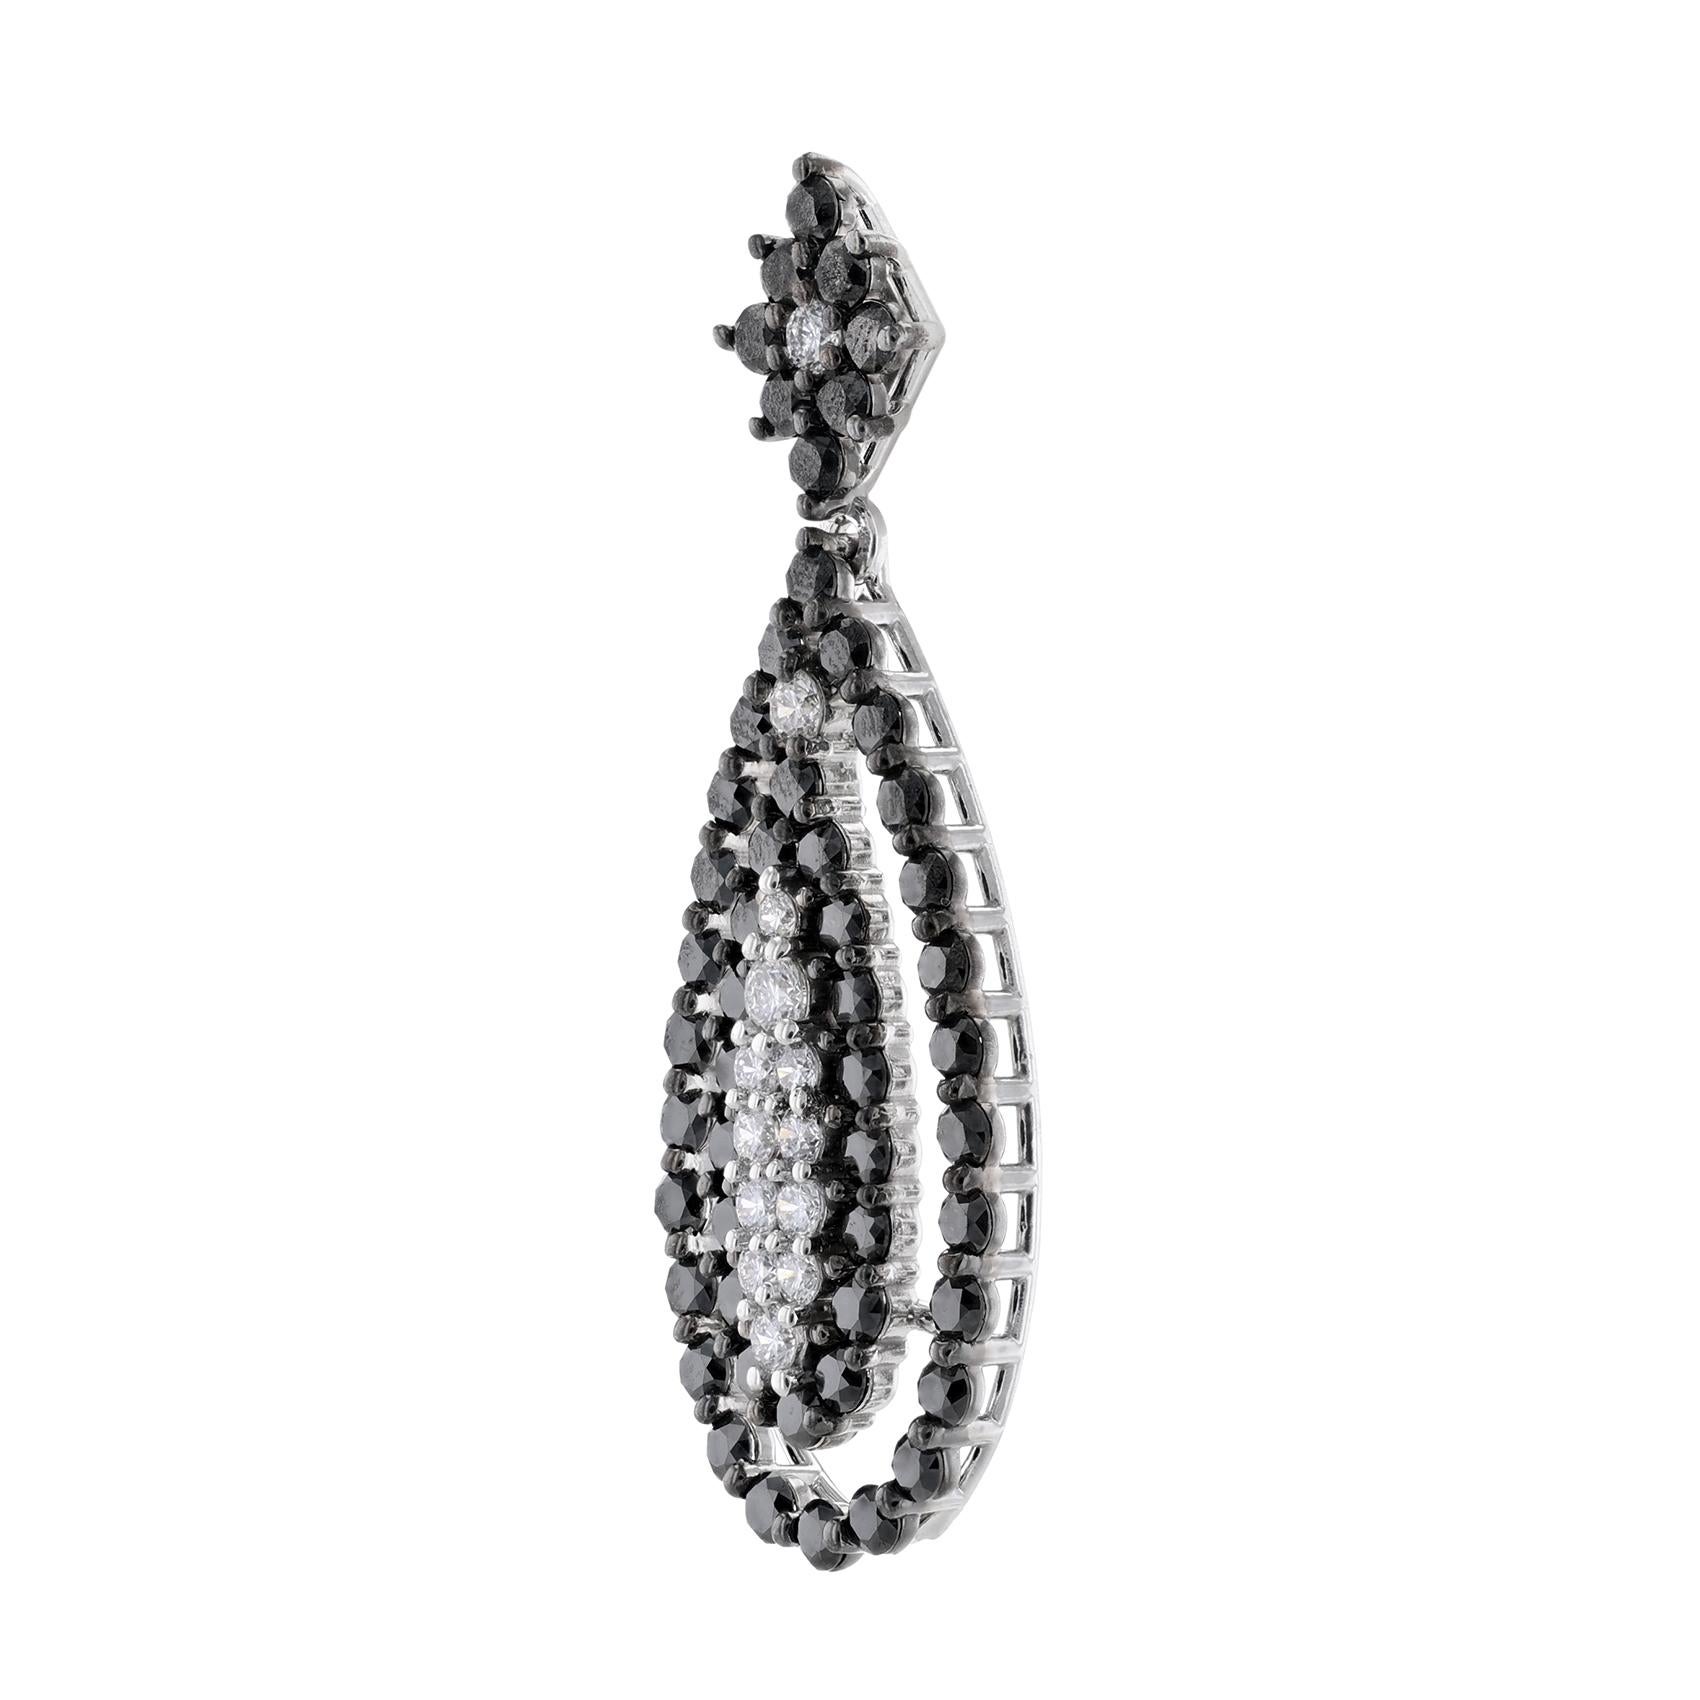 These teardrop shape earrings are made in 14K white gold and feature black diamonds (heat treated) weighing 4.20 carat. Along with round diamonds weighing 0.81 carat. All stones are prong set. 

